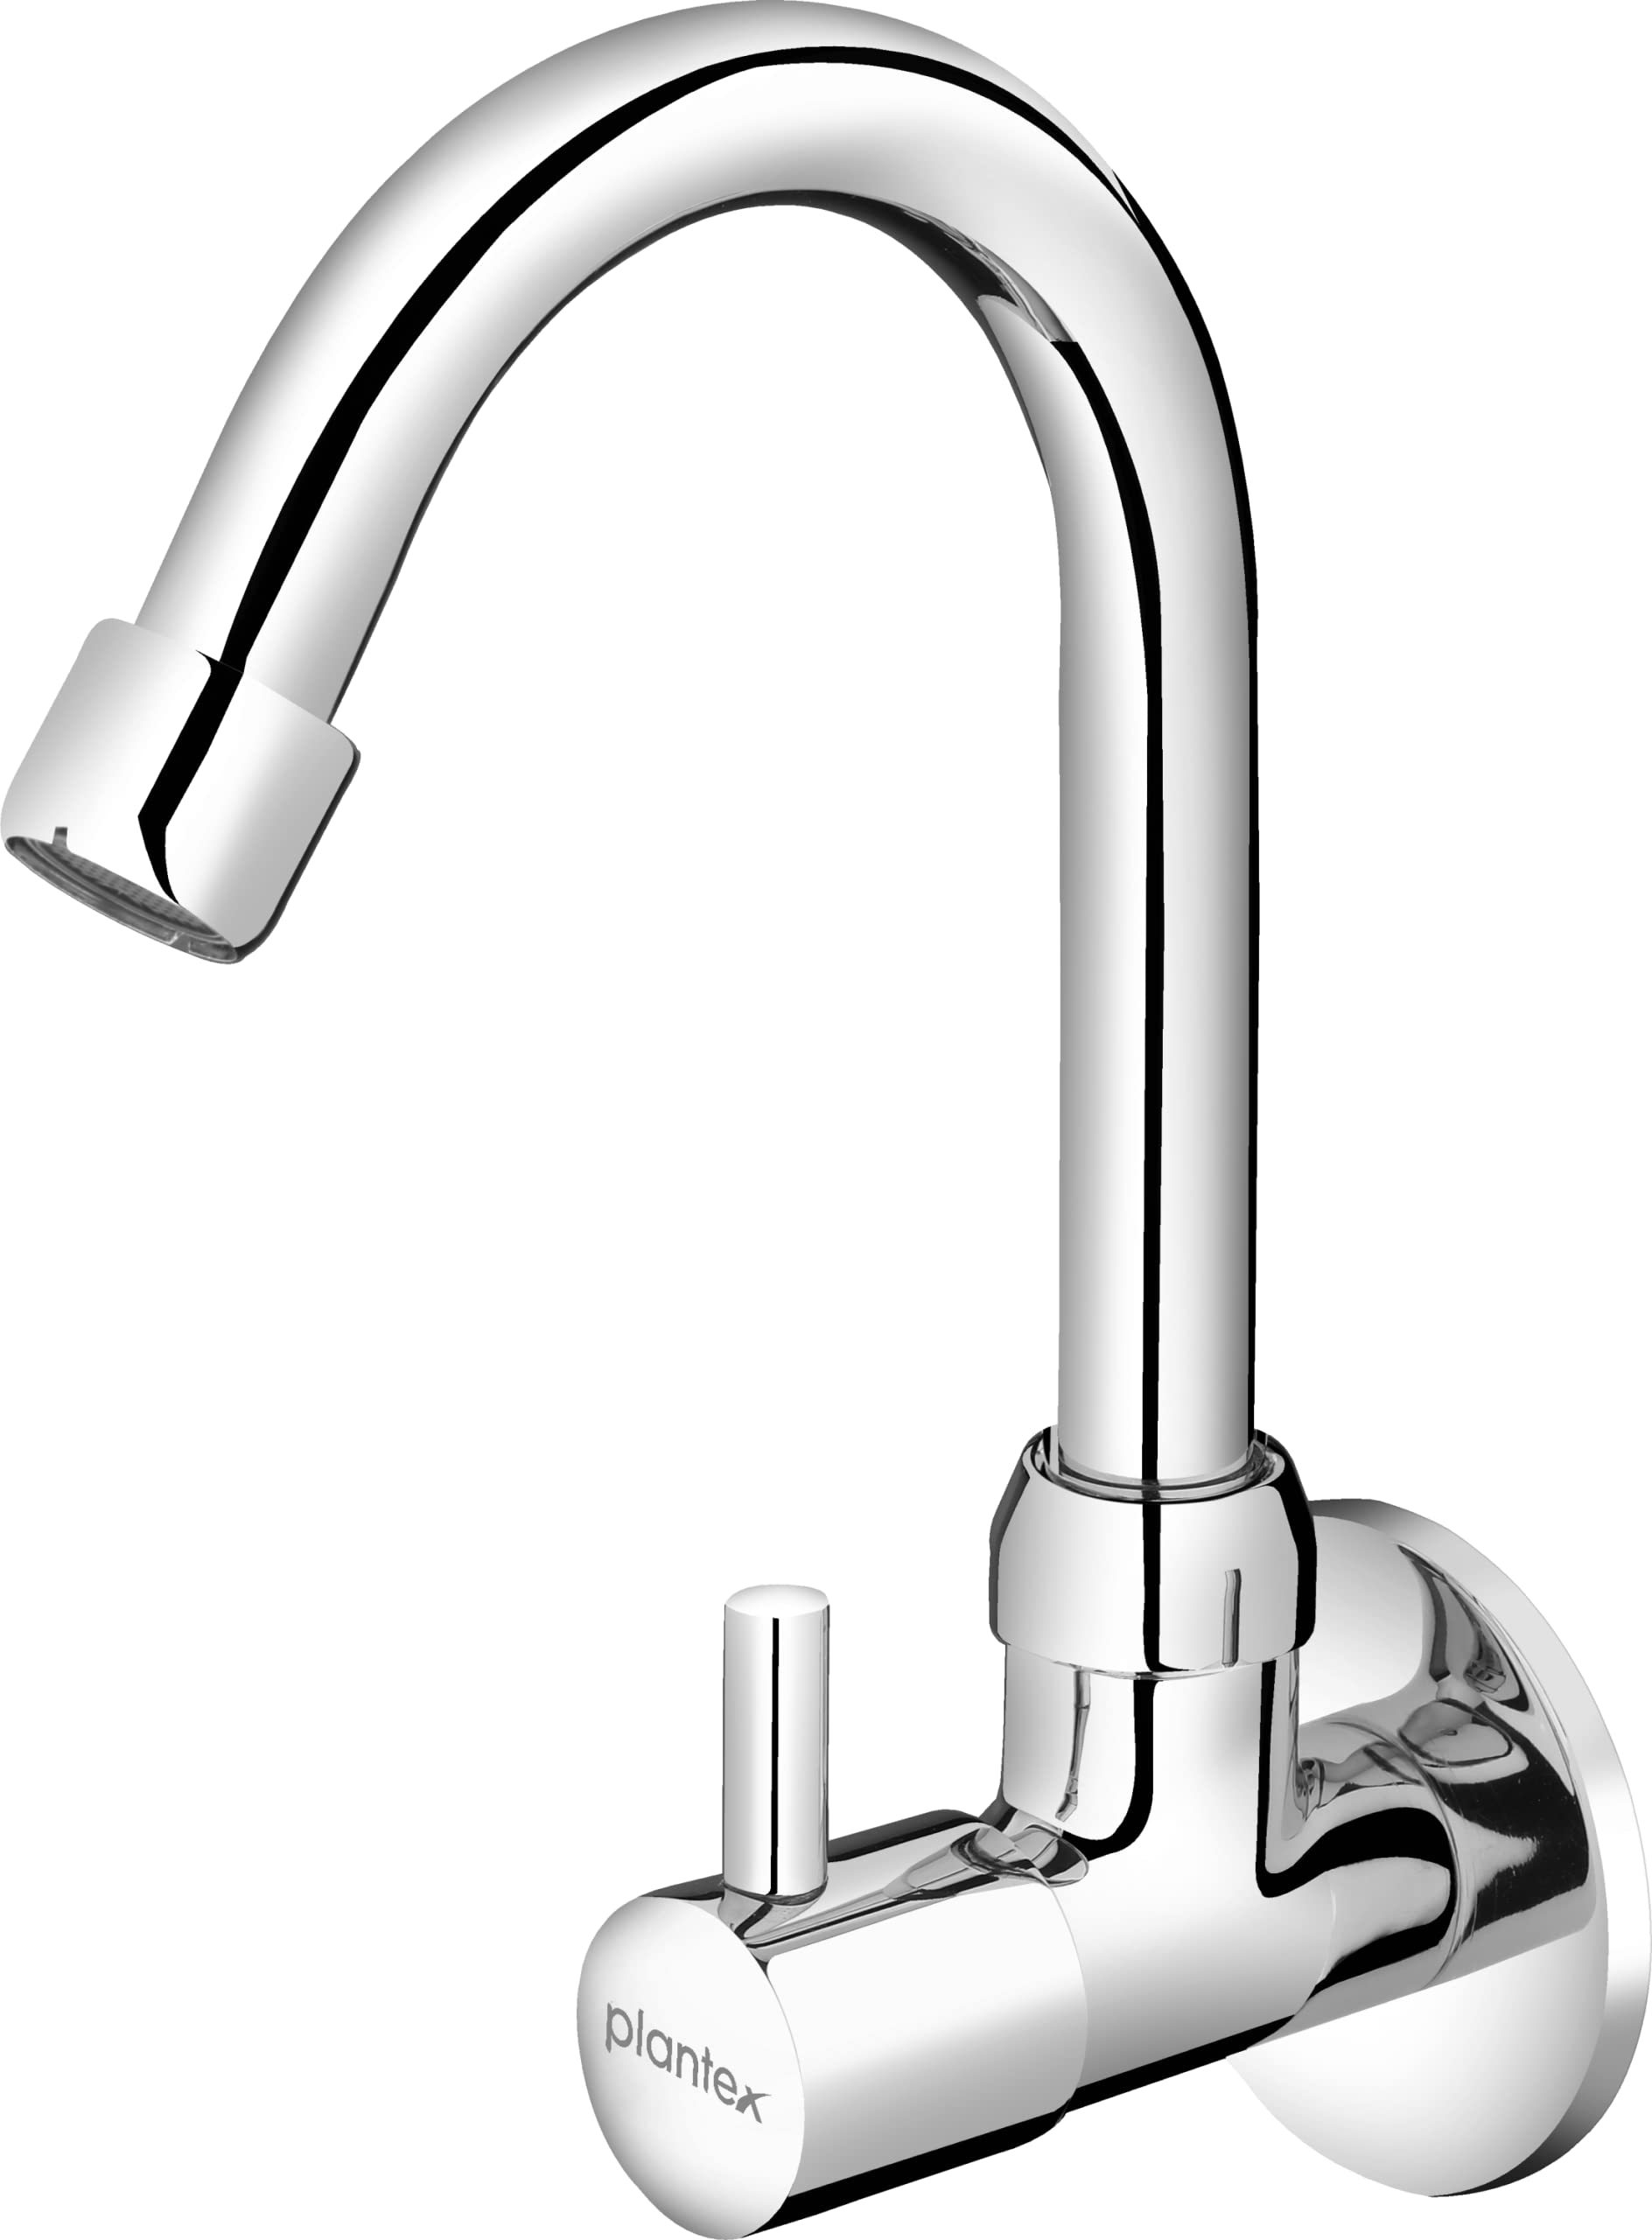 Plantex ICO-910 Pure Brass Single Lever Sink Cock with Swivel Spout (High Arch 360 Degree) for Kitchen Faucet/Sink Tap with Brass Wall Flange & Teflon Tape (Mirror-Chrome Finish)